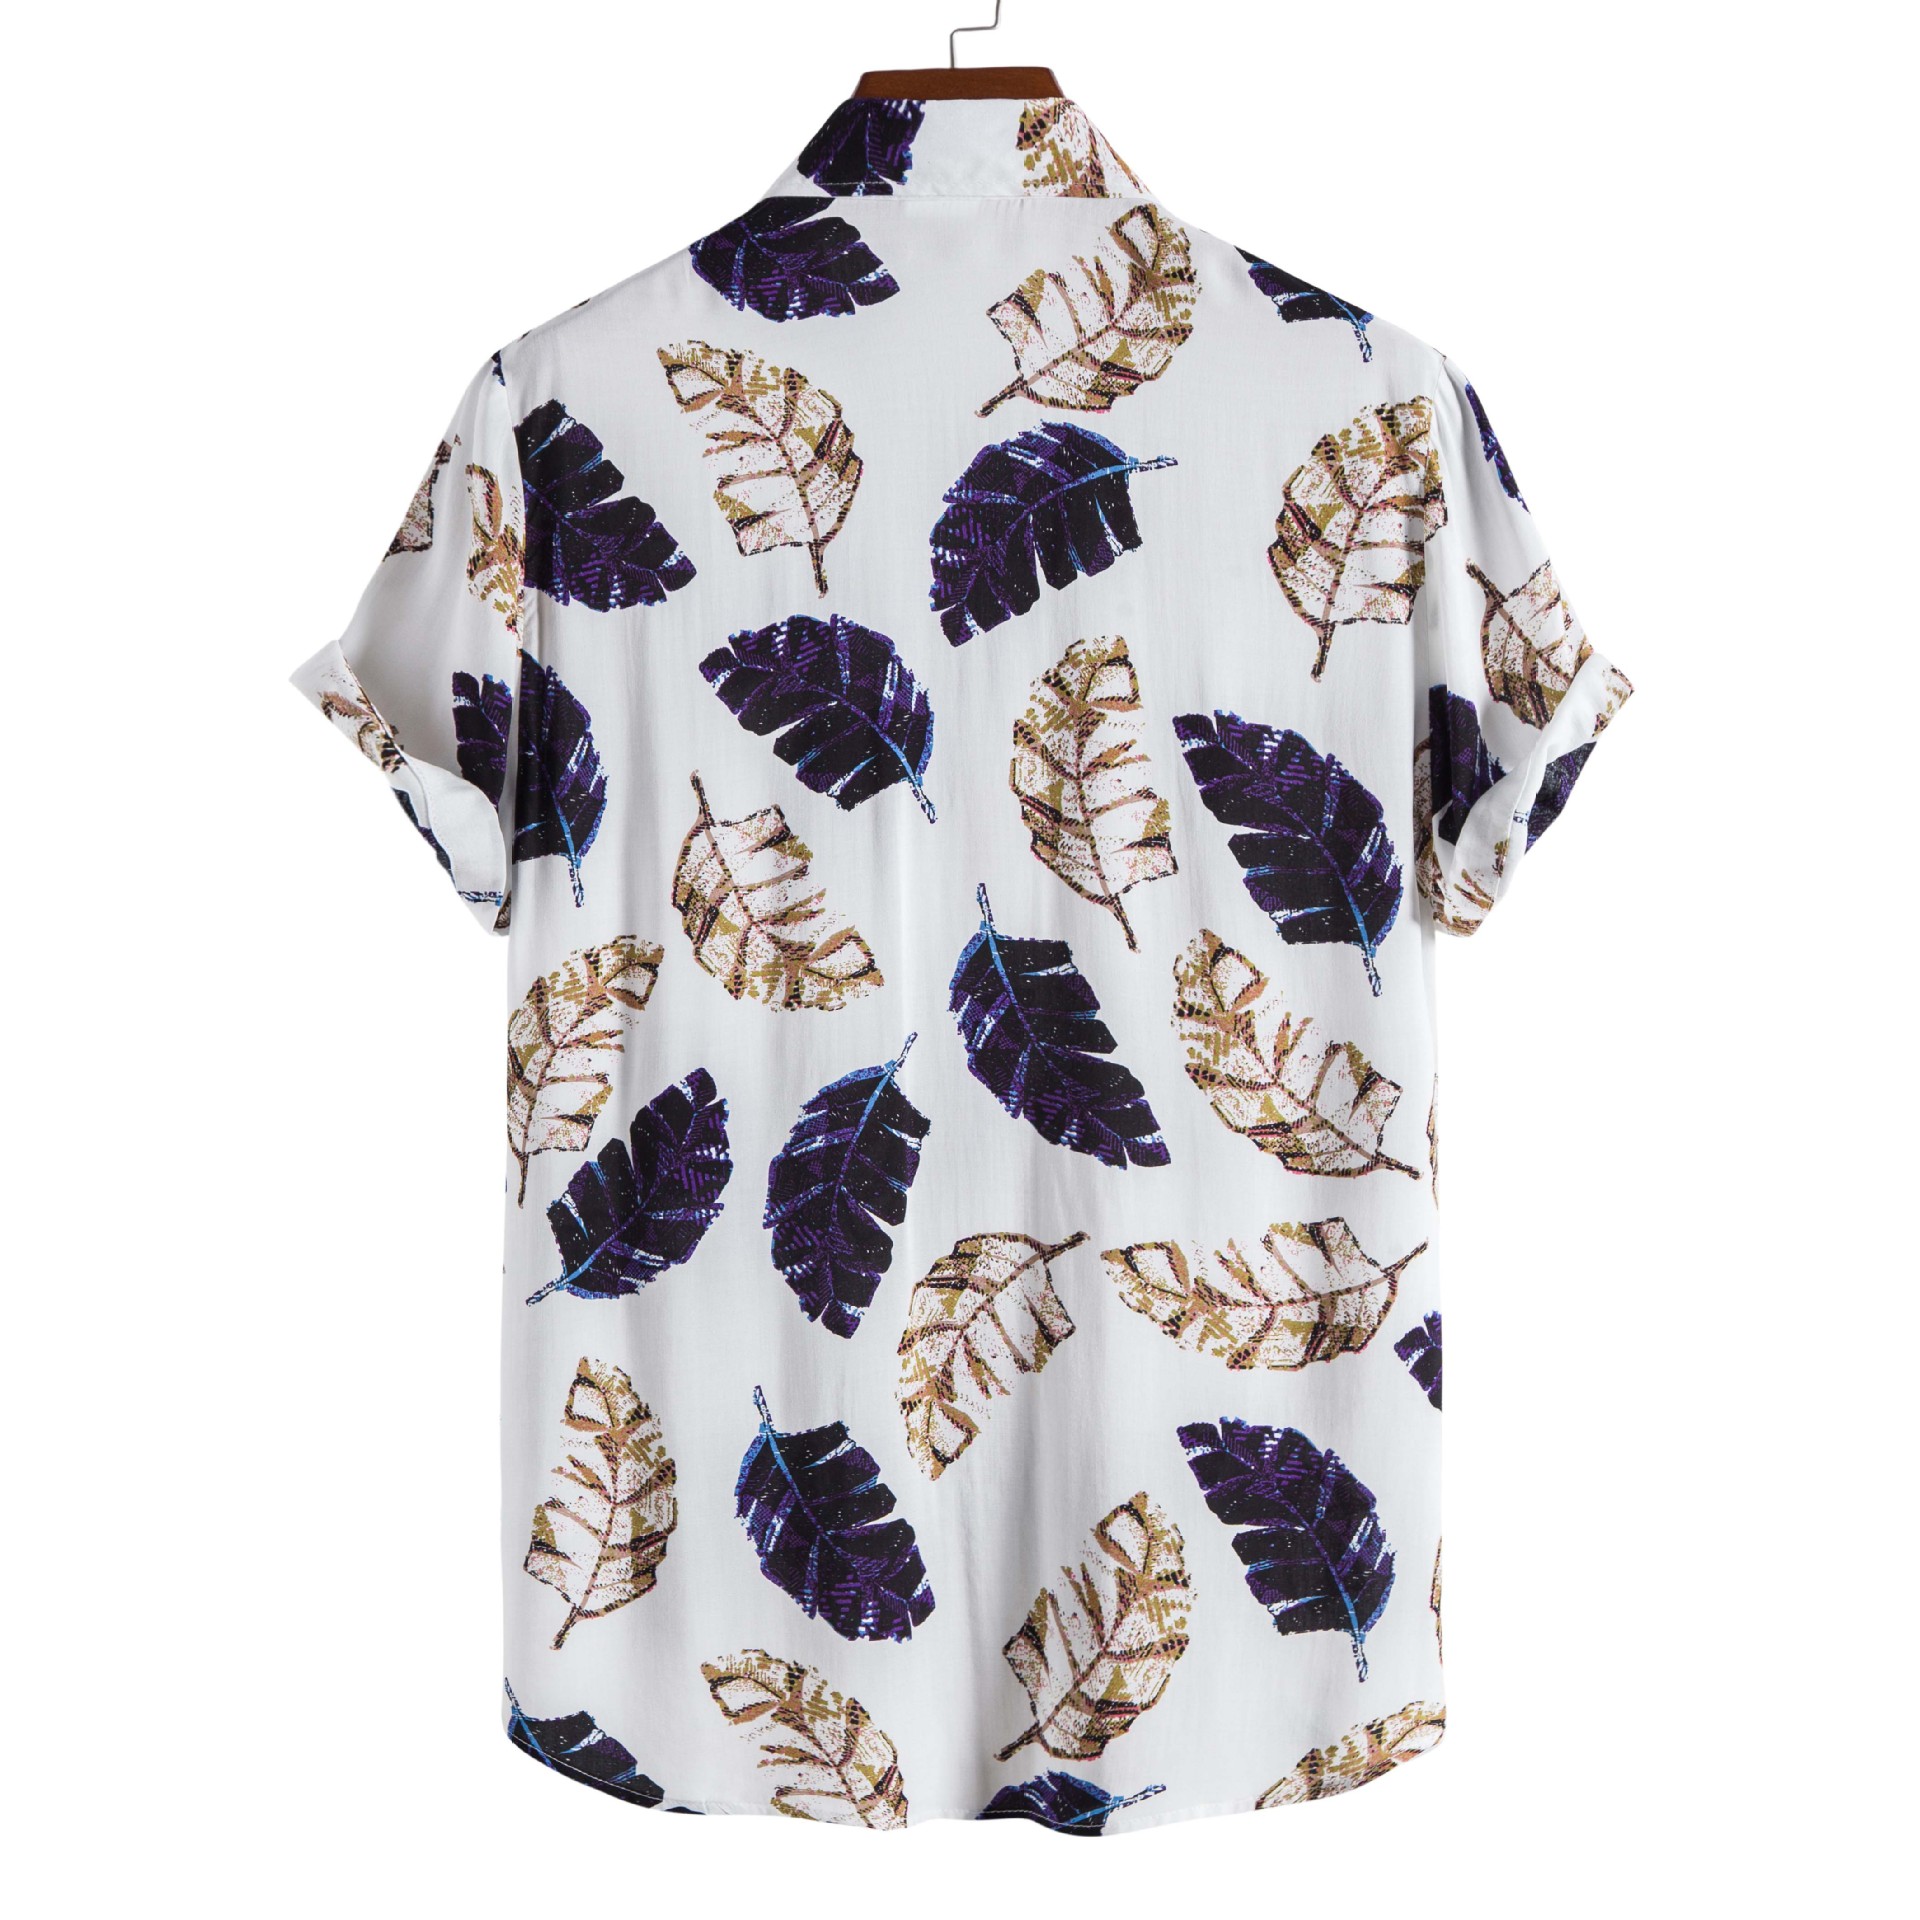 2022 Cross-border New Men's Fashion Trend Rayon Printing Short-sleeved Shirt One Piece On Behalf Of The Hair